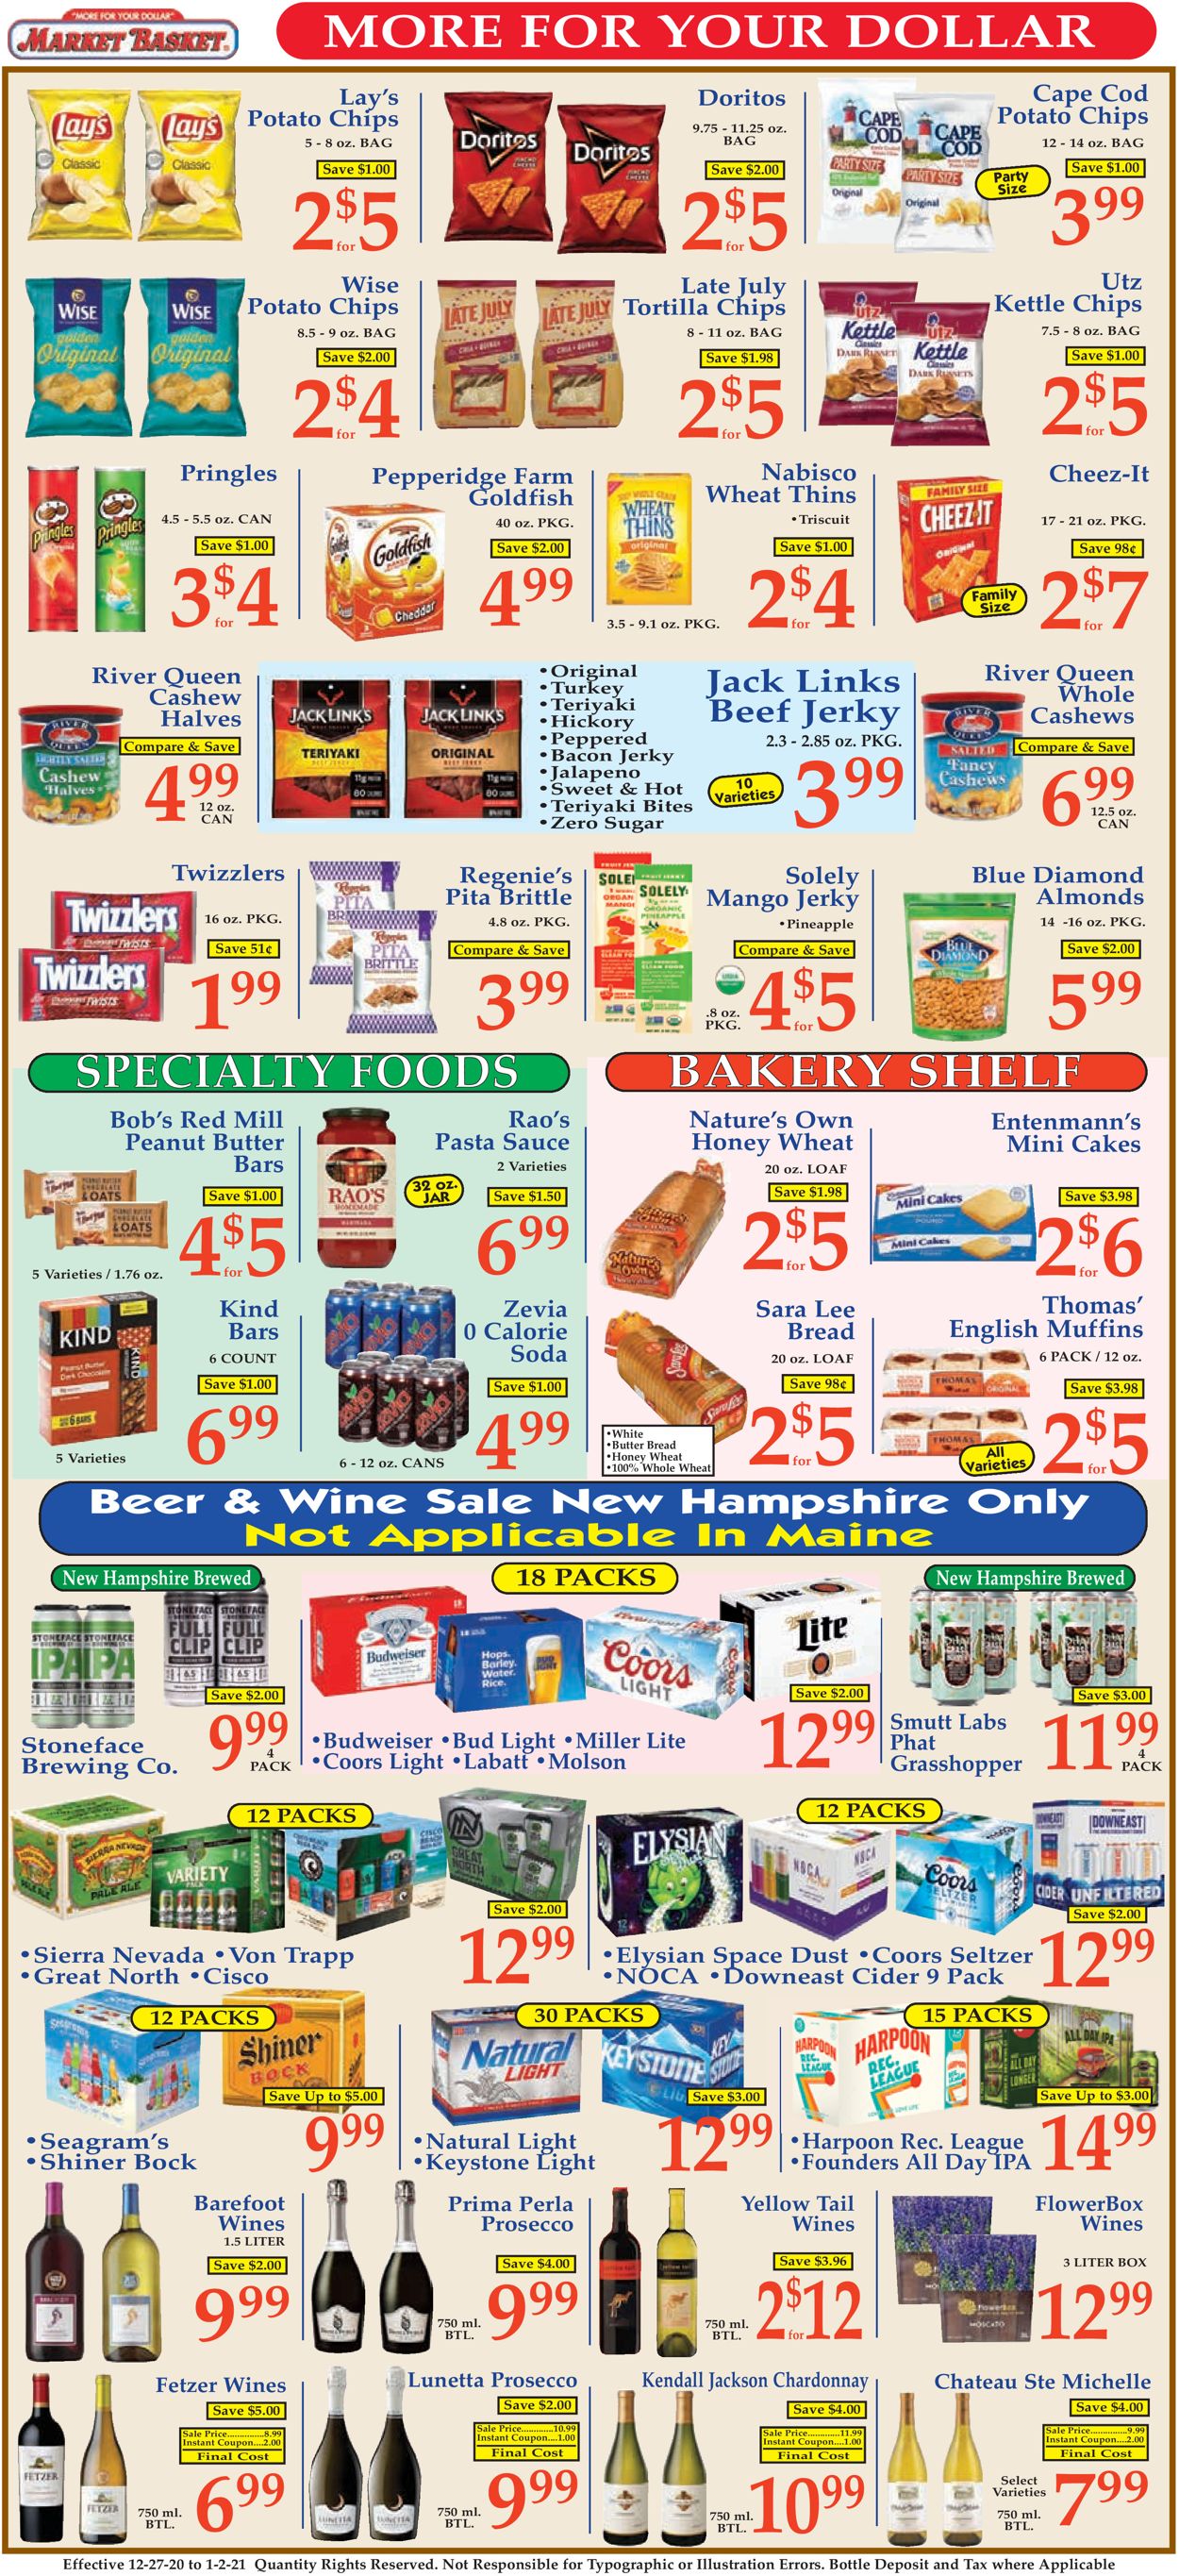 Market Basket Ad from 12/27/2020